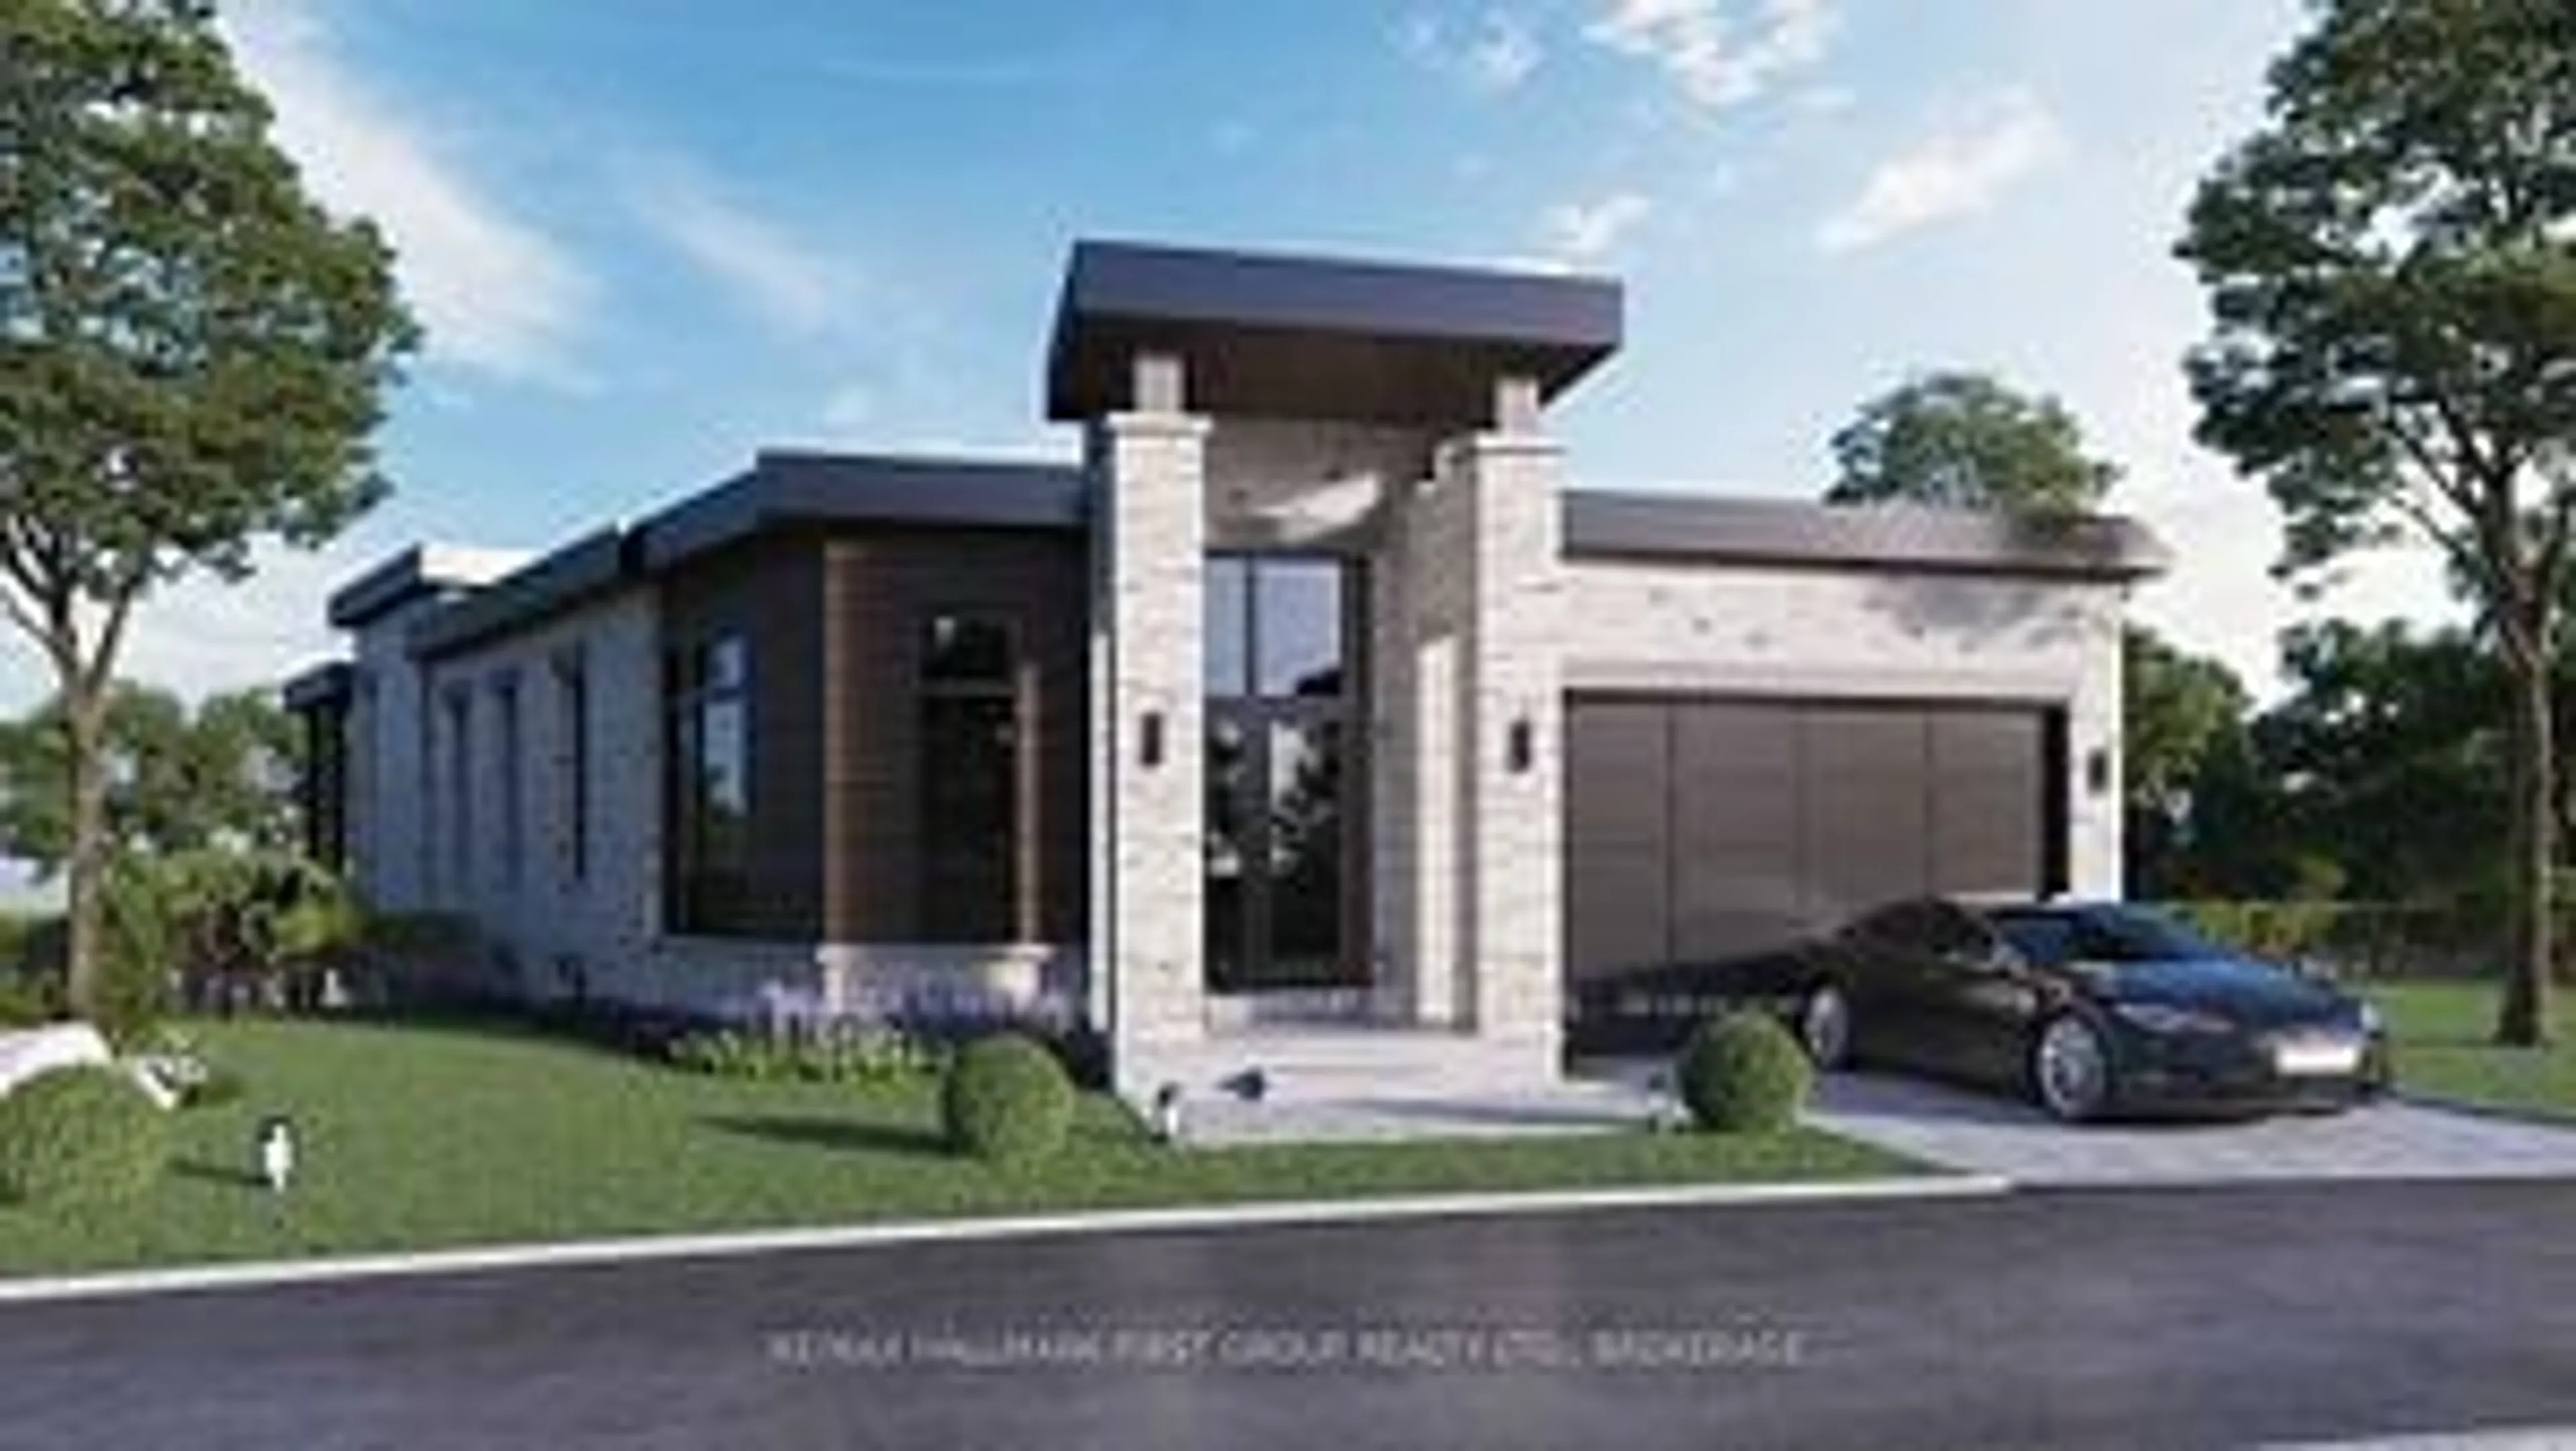 Home with brick exterior material for 520 Rossland Rd #2, Ajax Ontario L1G 2X5